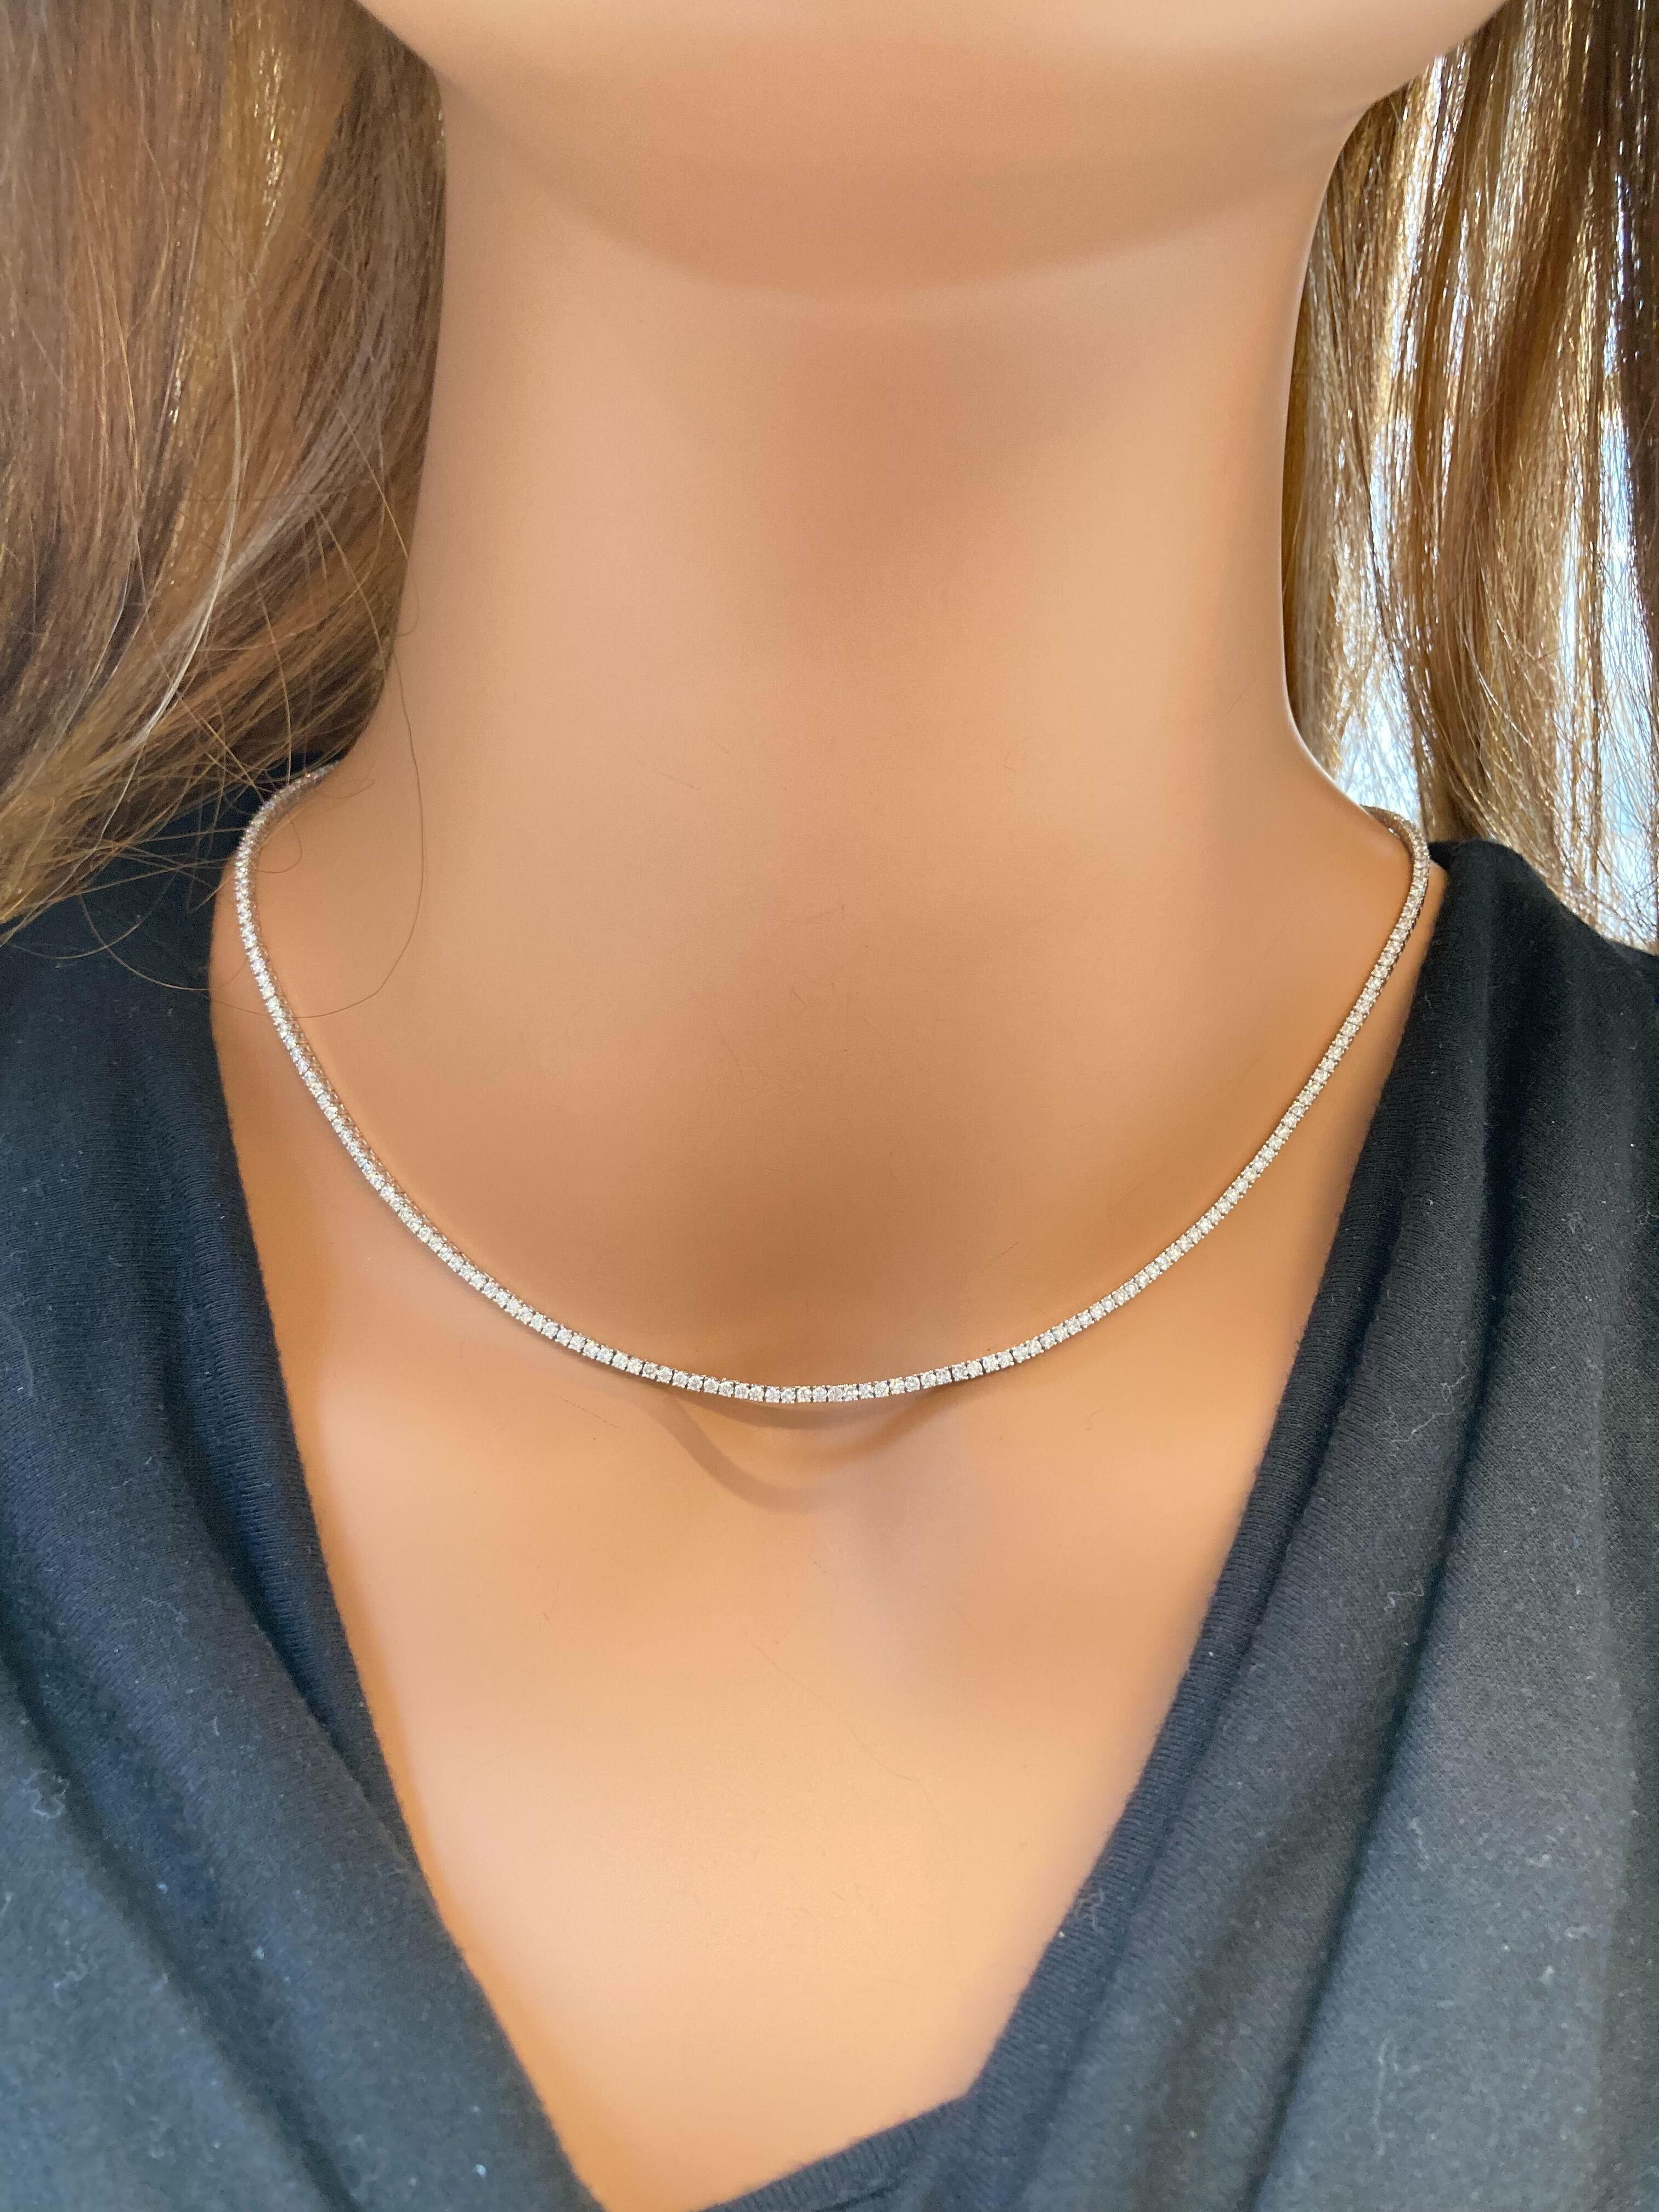 Experience the epitome of opulence and sophistication with our mesmerizing 5 carat round diamond Tennis Necklaces, meticulously designed to exude unparalleled beauty and luxury. Each necklace boasts an extravagant total of 260 dazzling diamonds, set